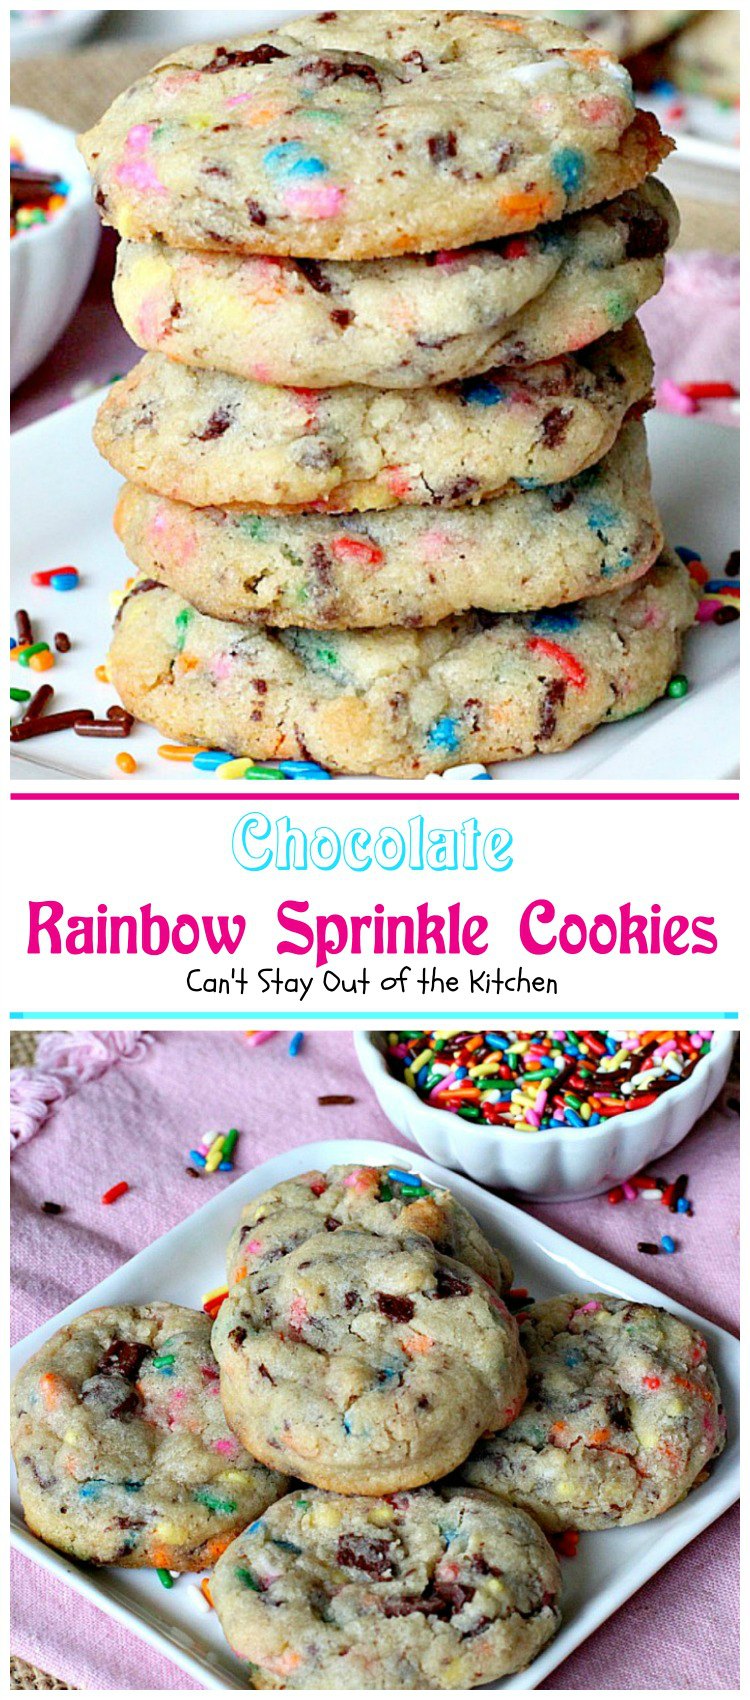 Chocolate Rainbow Sprinkle Cookies | Can't Stay Out of the KitchenChocolate Rainbow Sprinkle Cookies | Can't Stay Out of the Kitchen